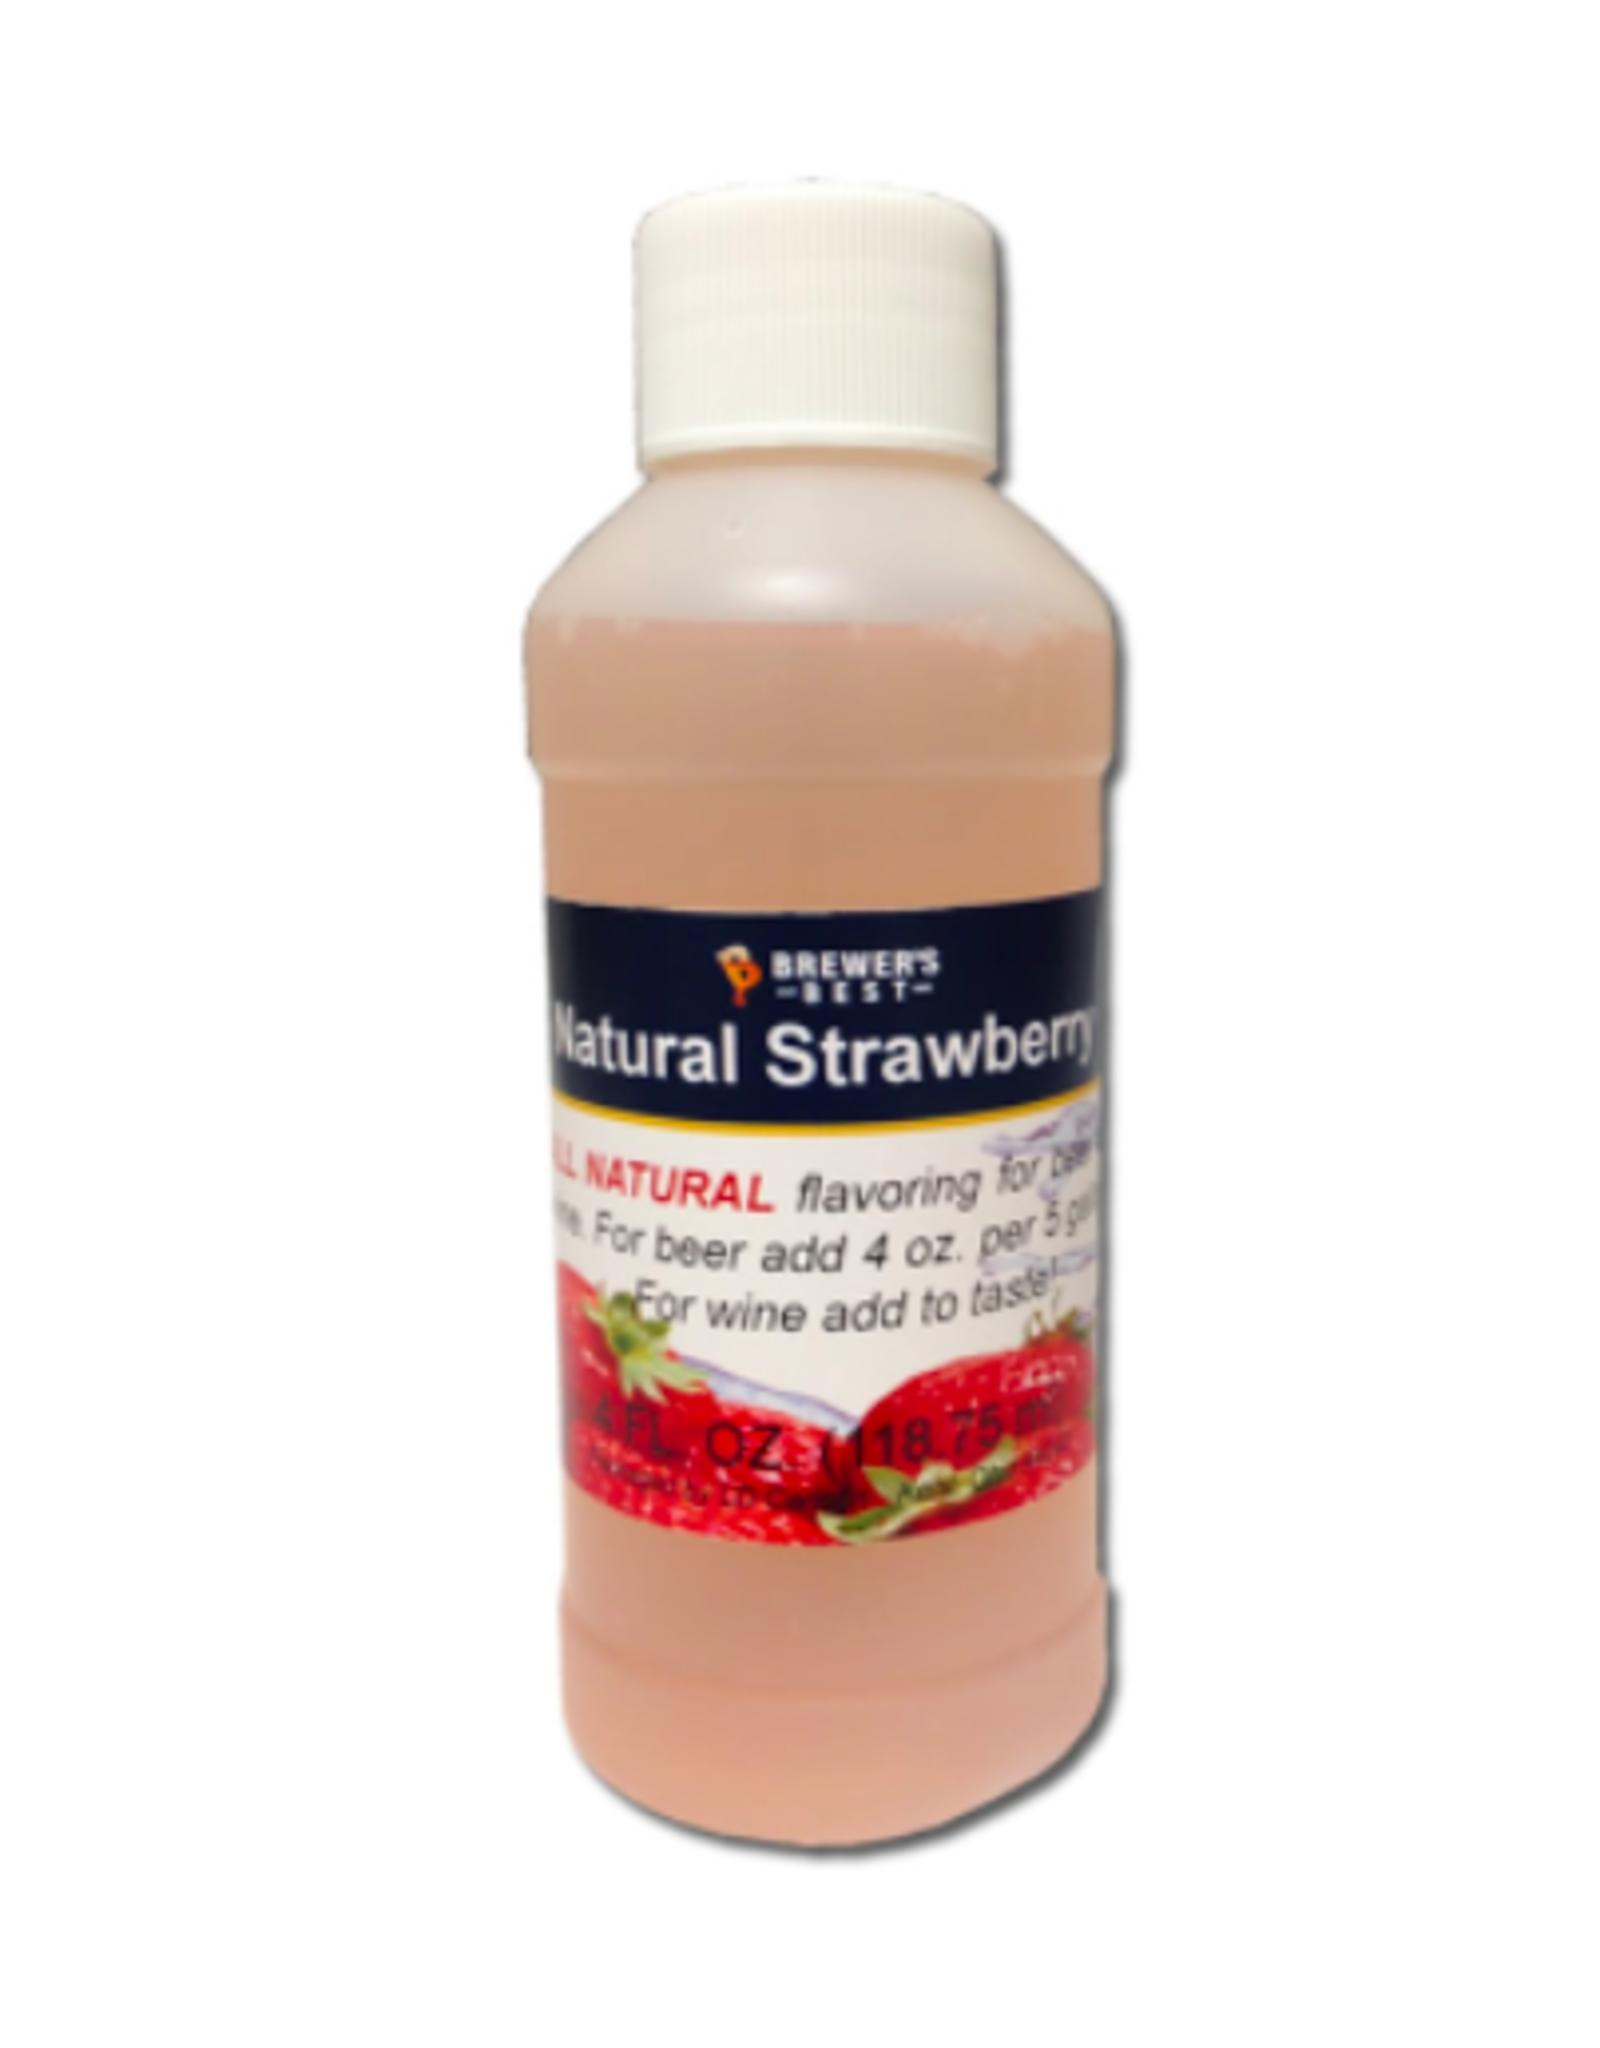 NATURAL STRAWBERRY FLAVORING